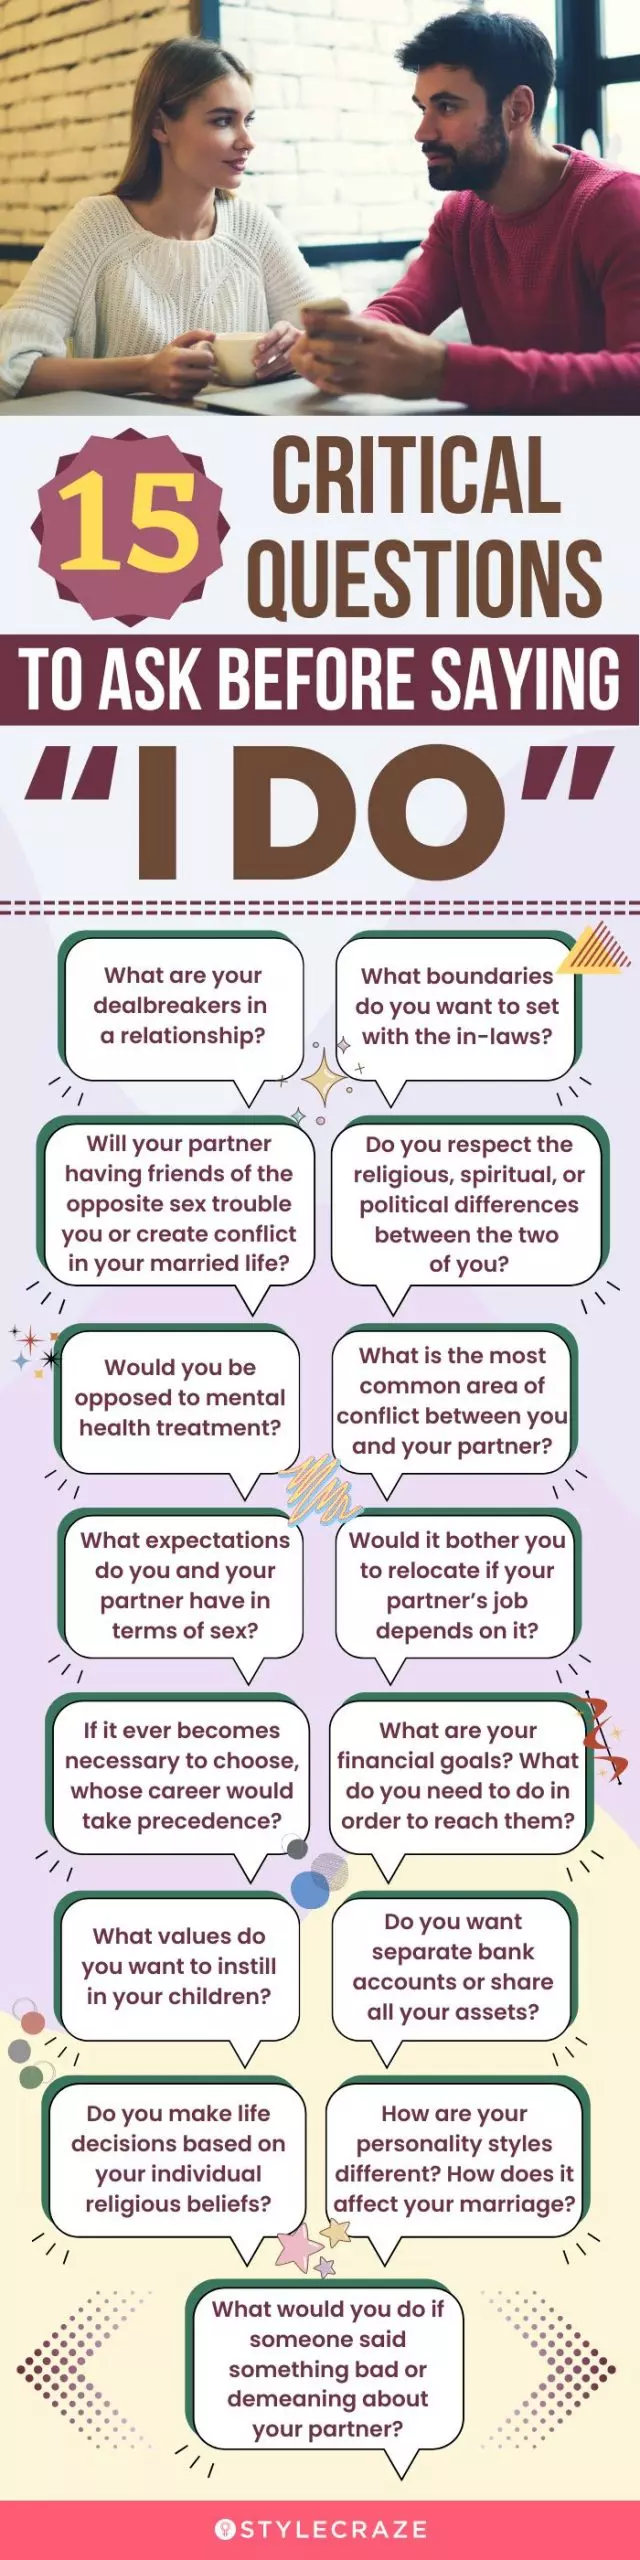 15 critical questions to ask before saying “i do” (infographic)